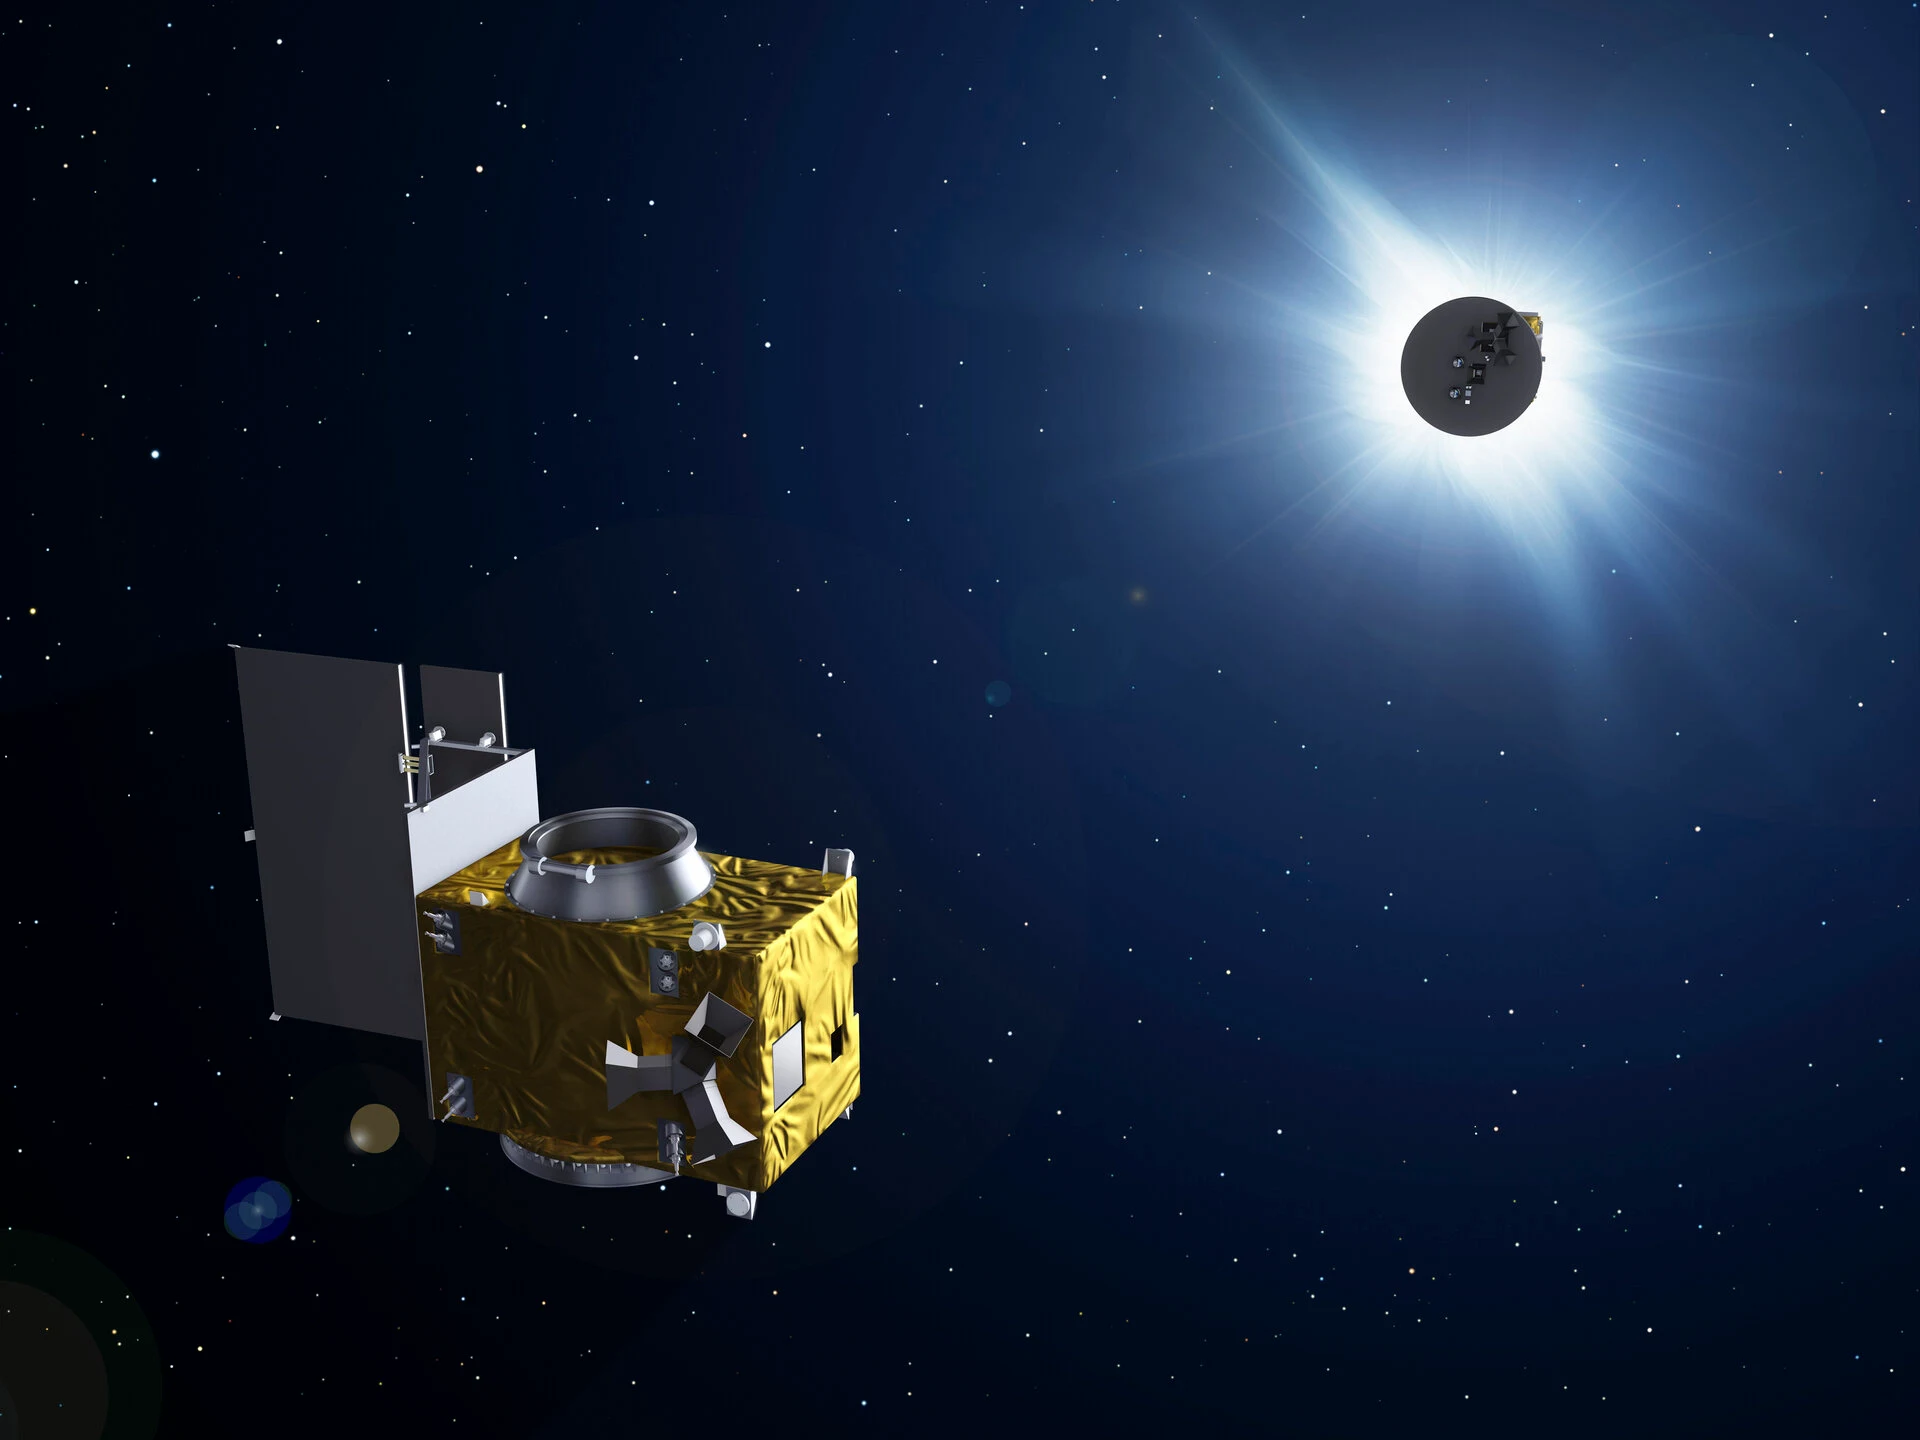 ISRO To Launch Europe's Proba-3 Spacecraft that Artificially Creates Solar Eclipse in Space